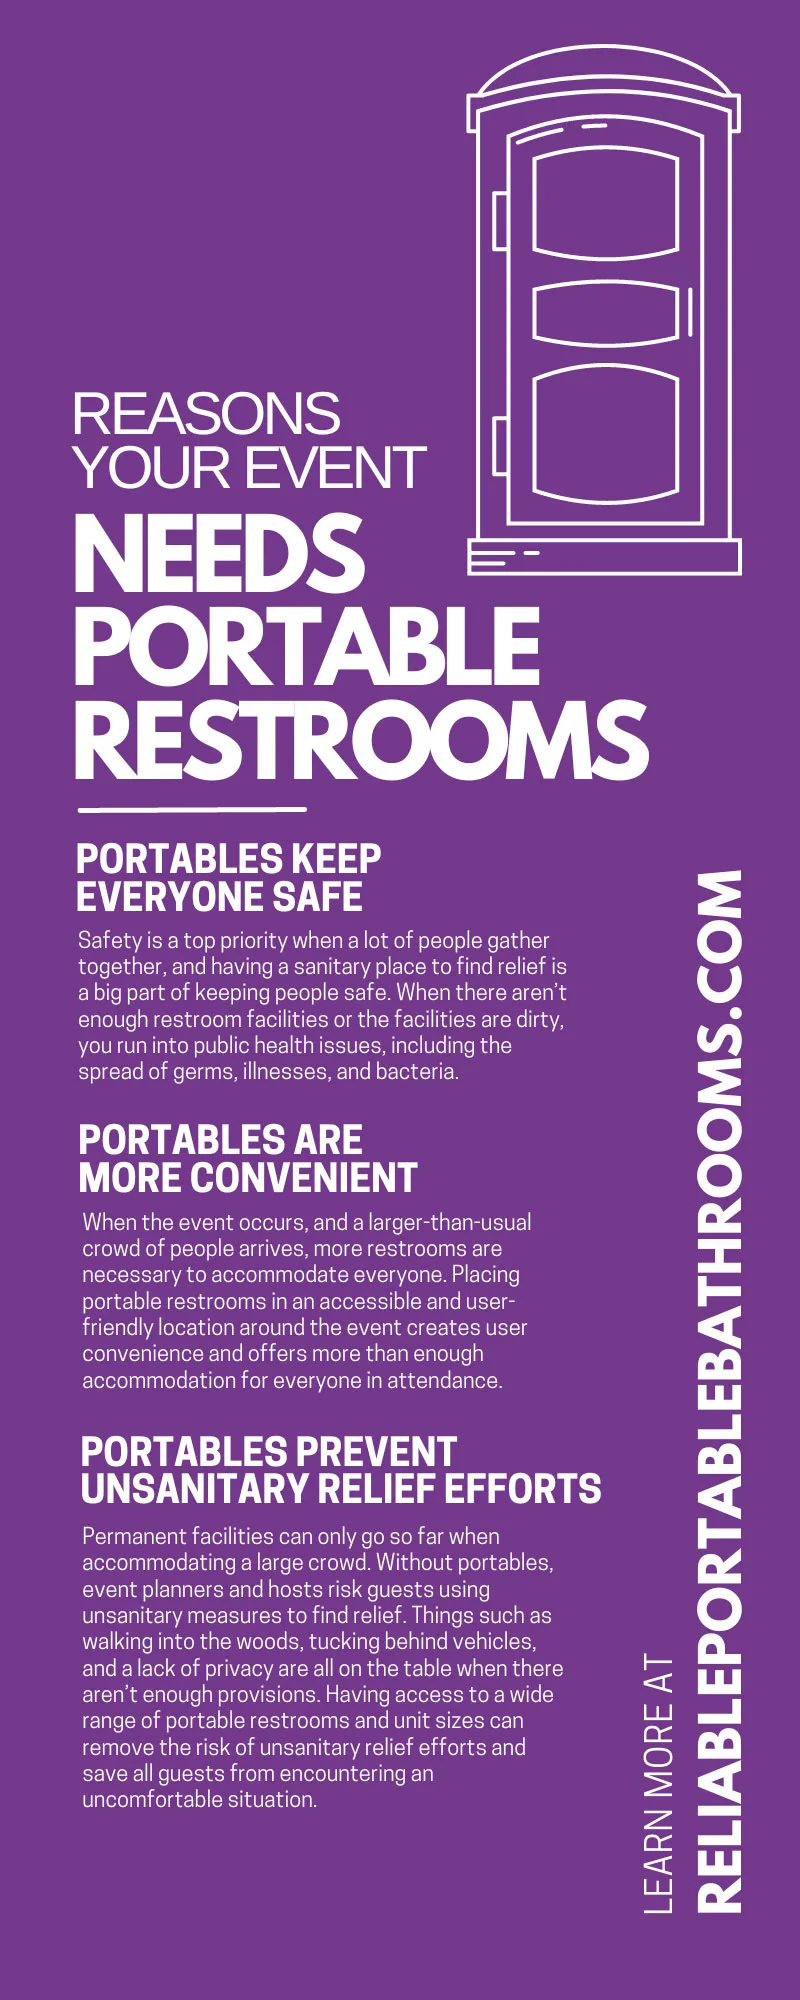 Reasons Your Event Needs Portable Restrooms 